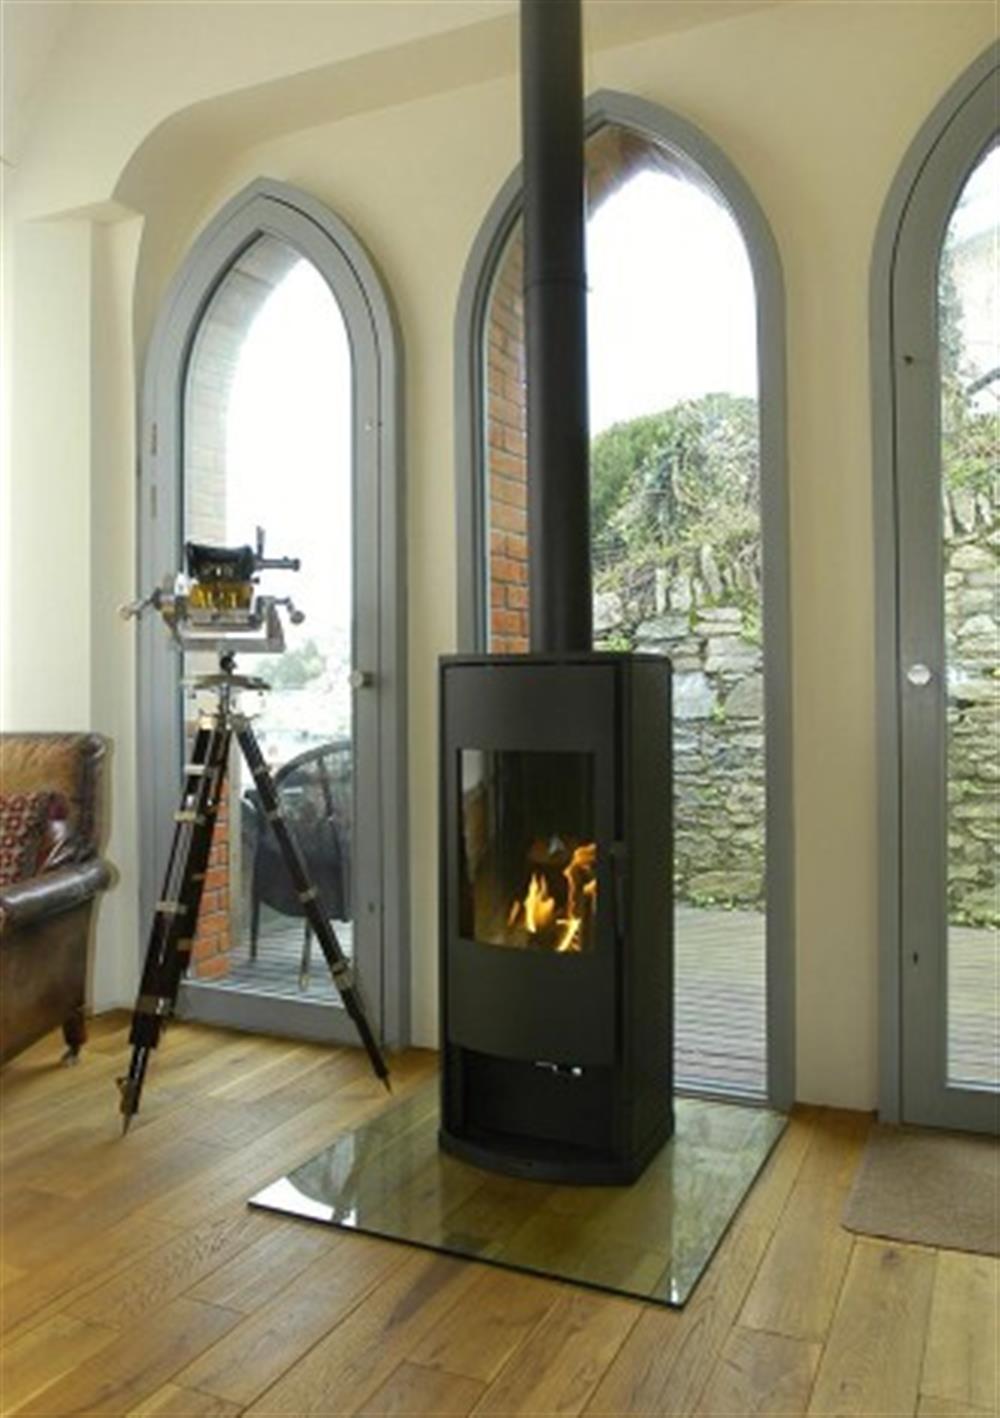 The very efficient flame log effect gas stove.